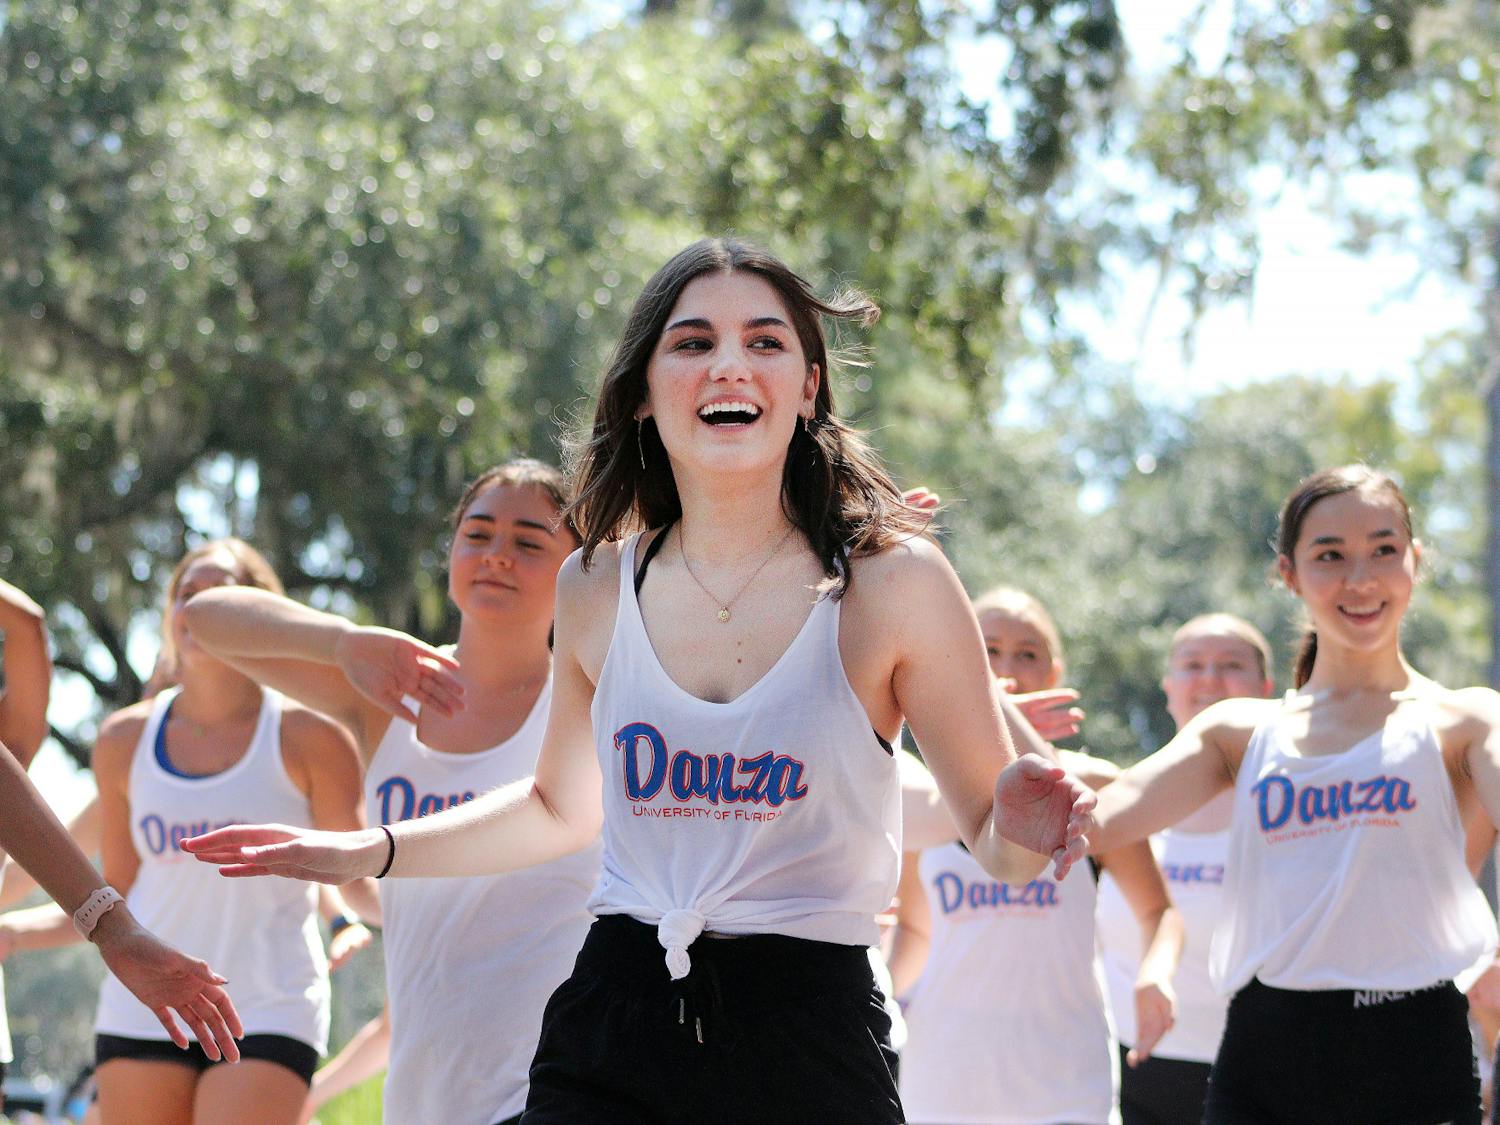 Popcorn, power walkers and political figures —&nbsp;just some of the things you can expect at UF Homecoming.

After a slow, but steady return to in-person events in 2021 following Homecoming’s cancellation in 2020, the parade and other festivities are back in full force. Homecoming festivities initiated the morning of Oct. 7 with a festival, the Gator Gallop run and the annual Homecoming parade.&nbsp;